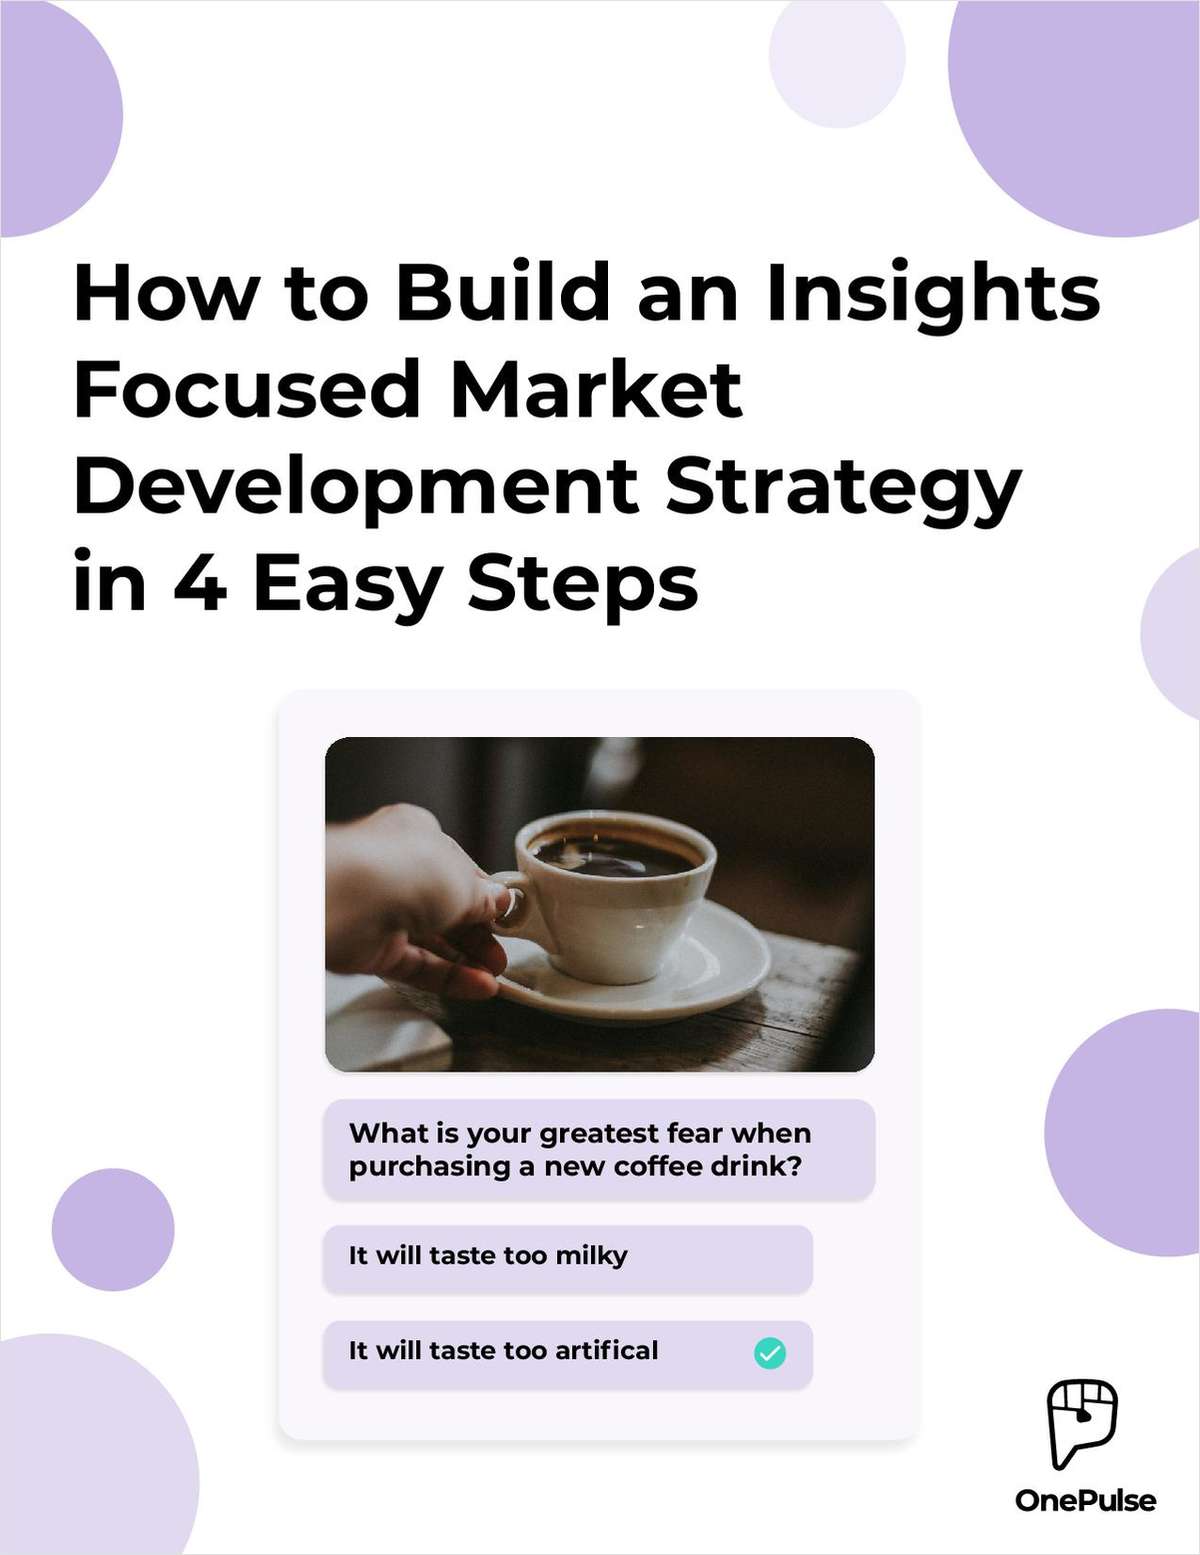 How to Build an Insights Focused Market Development Strategy in 4 Easy Steps